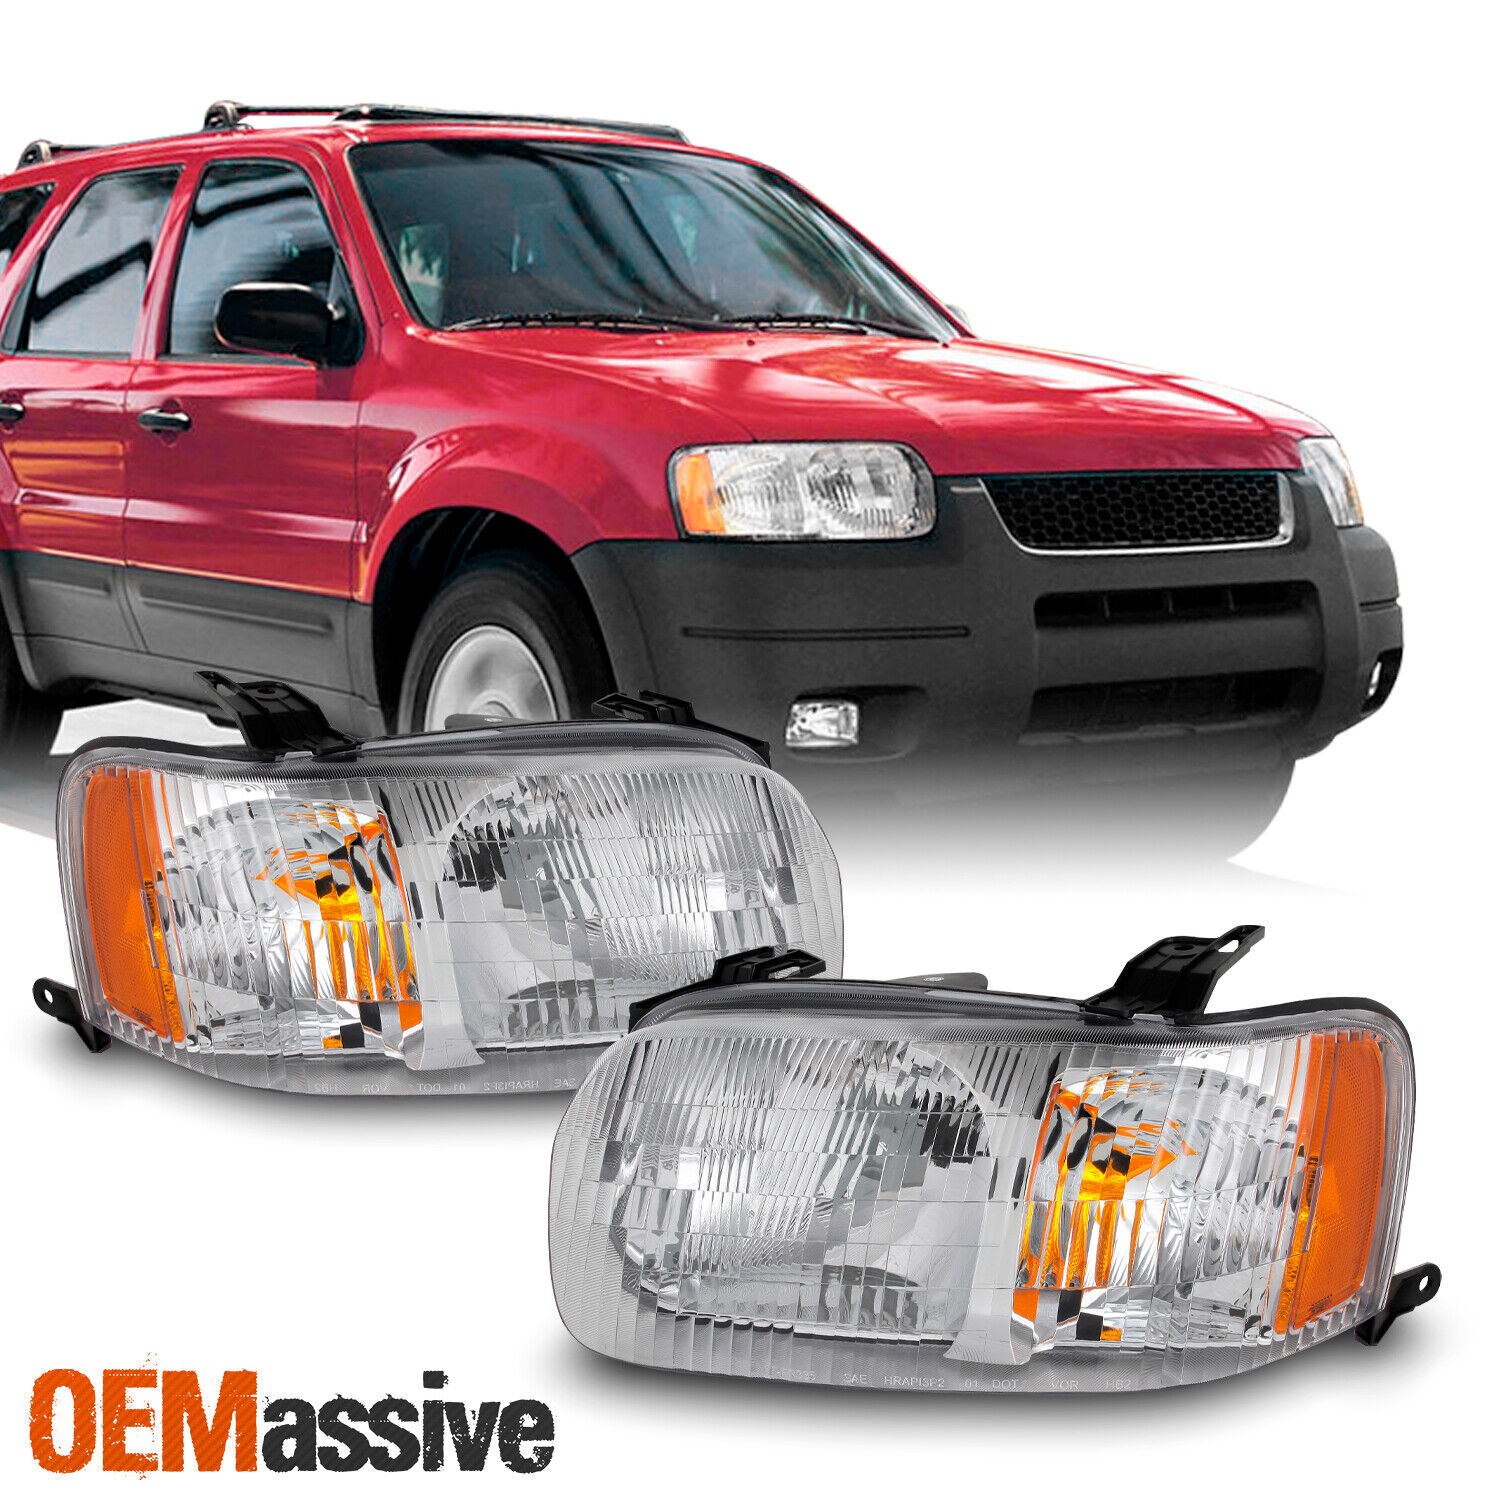 [OE Style] For 2001-2004 Ford Escape Chrome Bezel Headlight Lamp Assembly 02 03